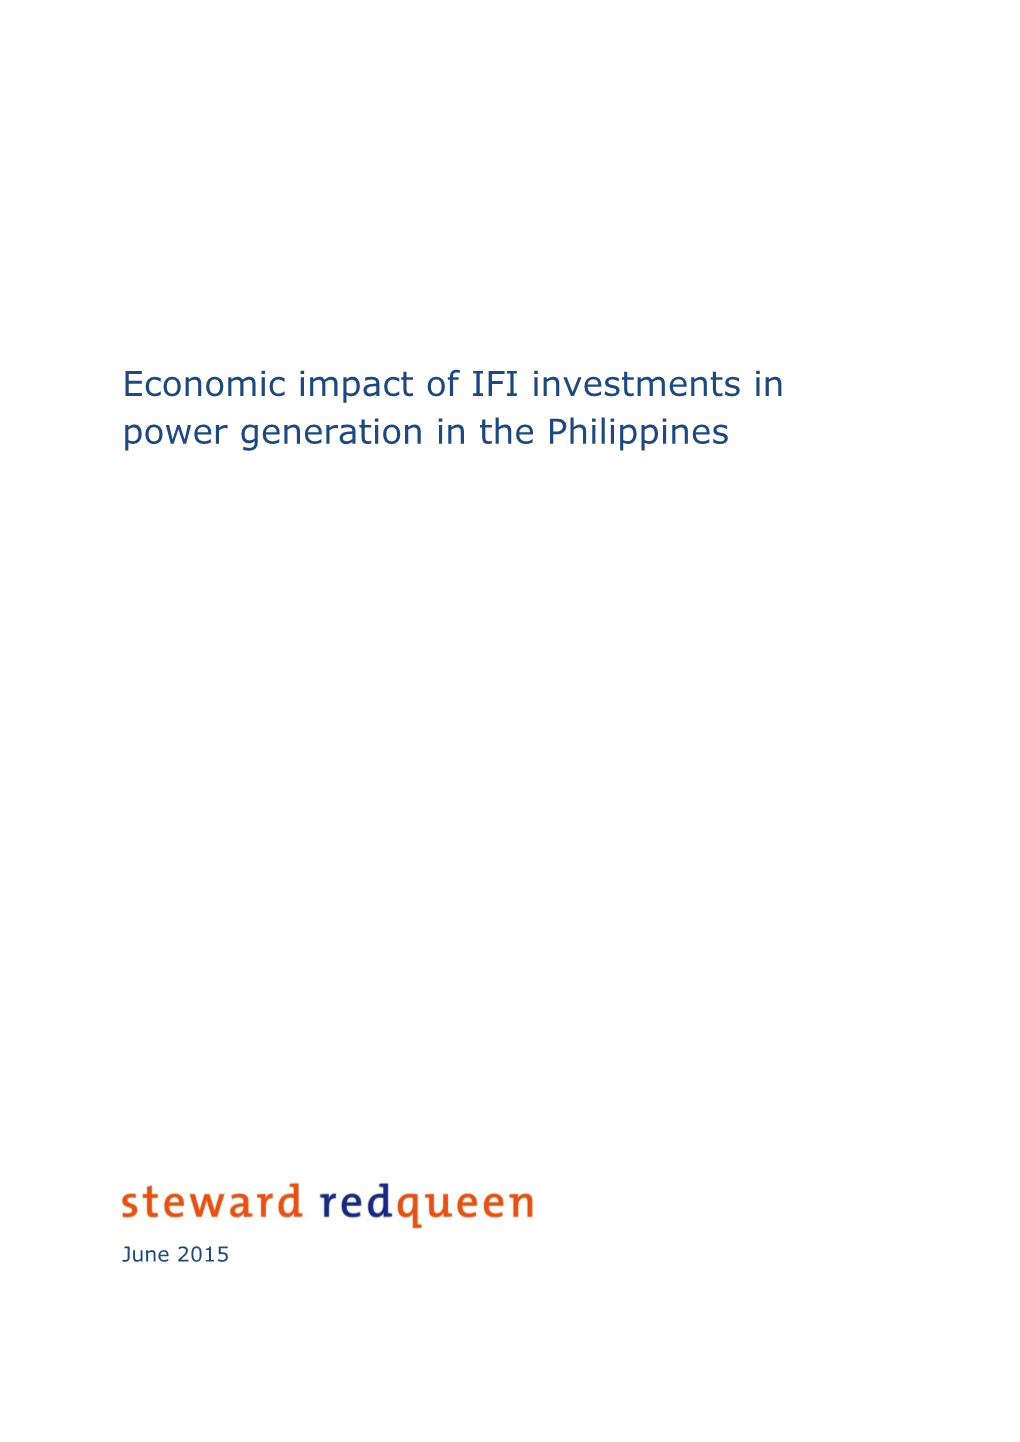 Economic Impact of IFI Investments in Power Generation in the Philippines